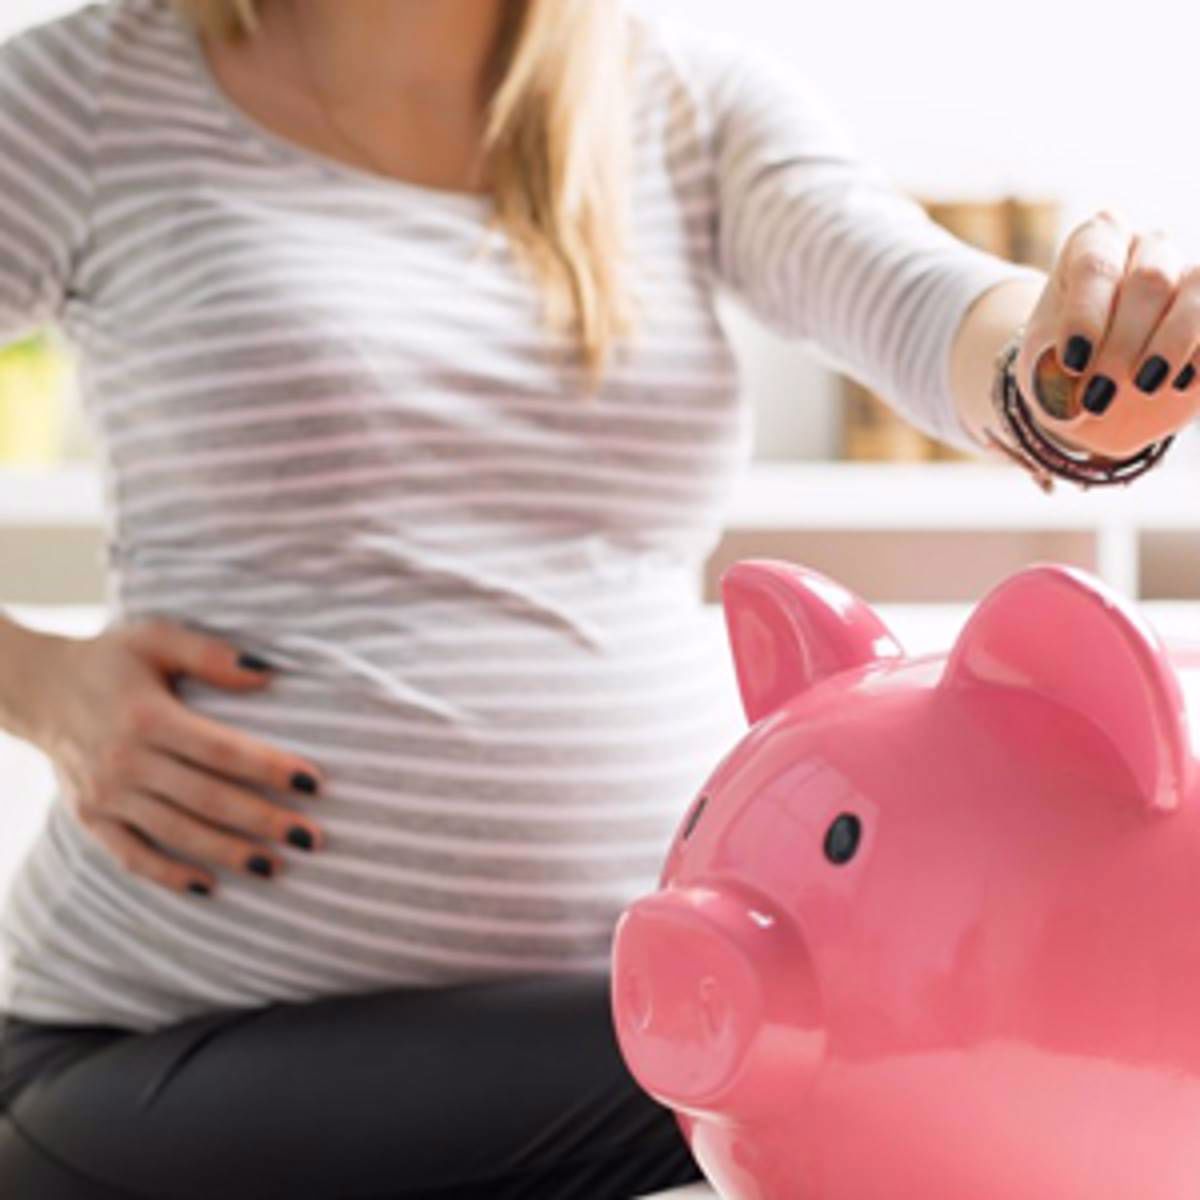 How to Budget for Maternity Leave